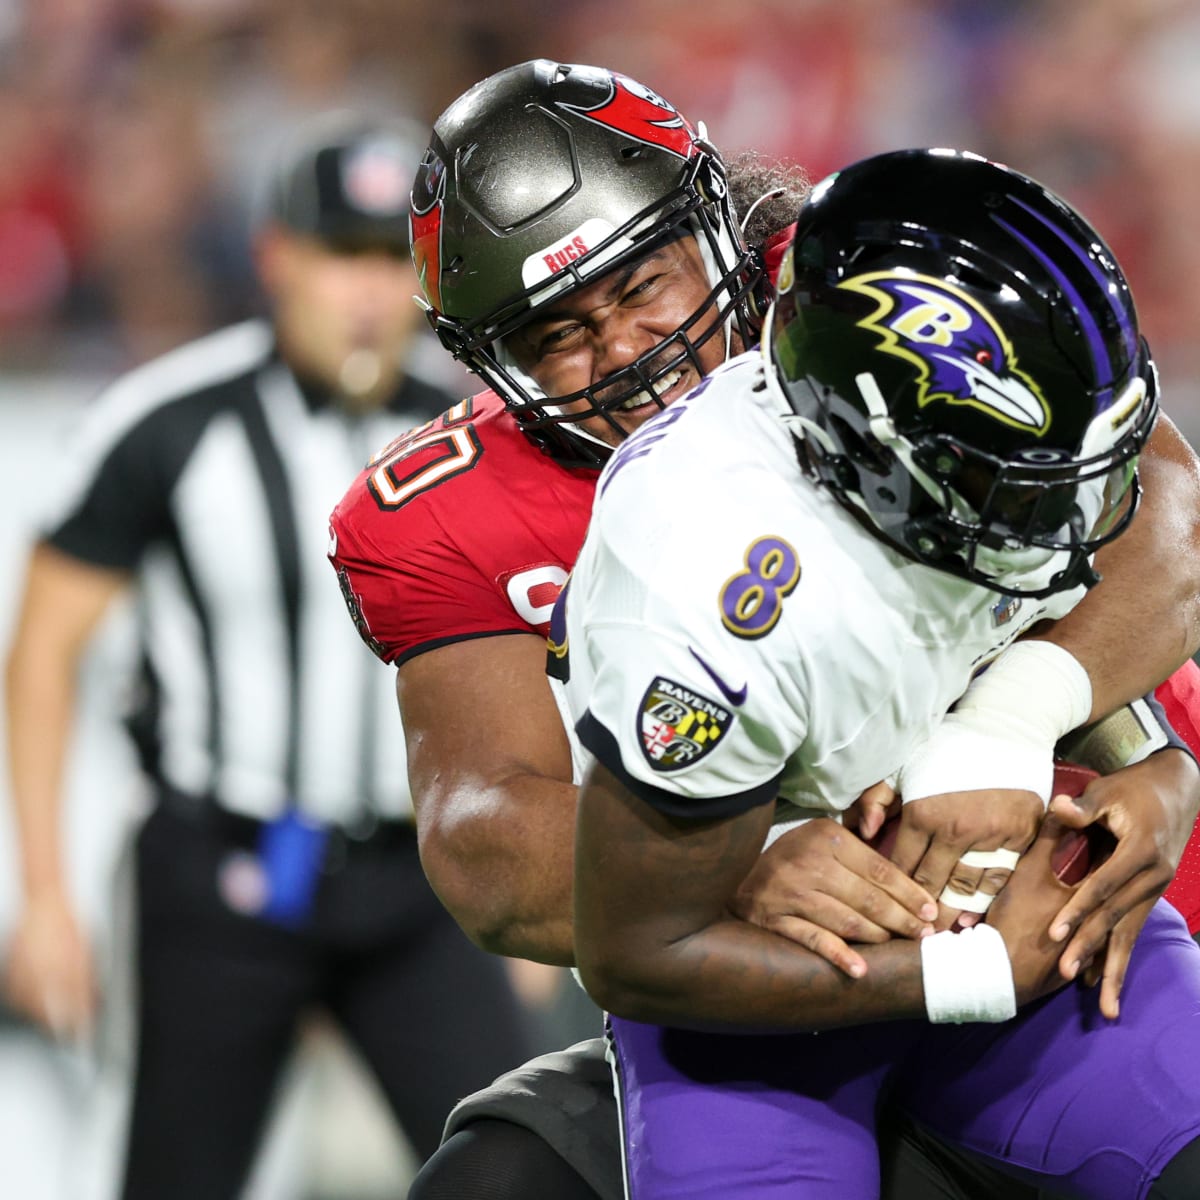 Who plays  Prime's NFL Thursday Night Football tonight?  Buccaneers-Ravens live stream, TV, time 